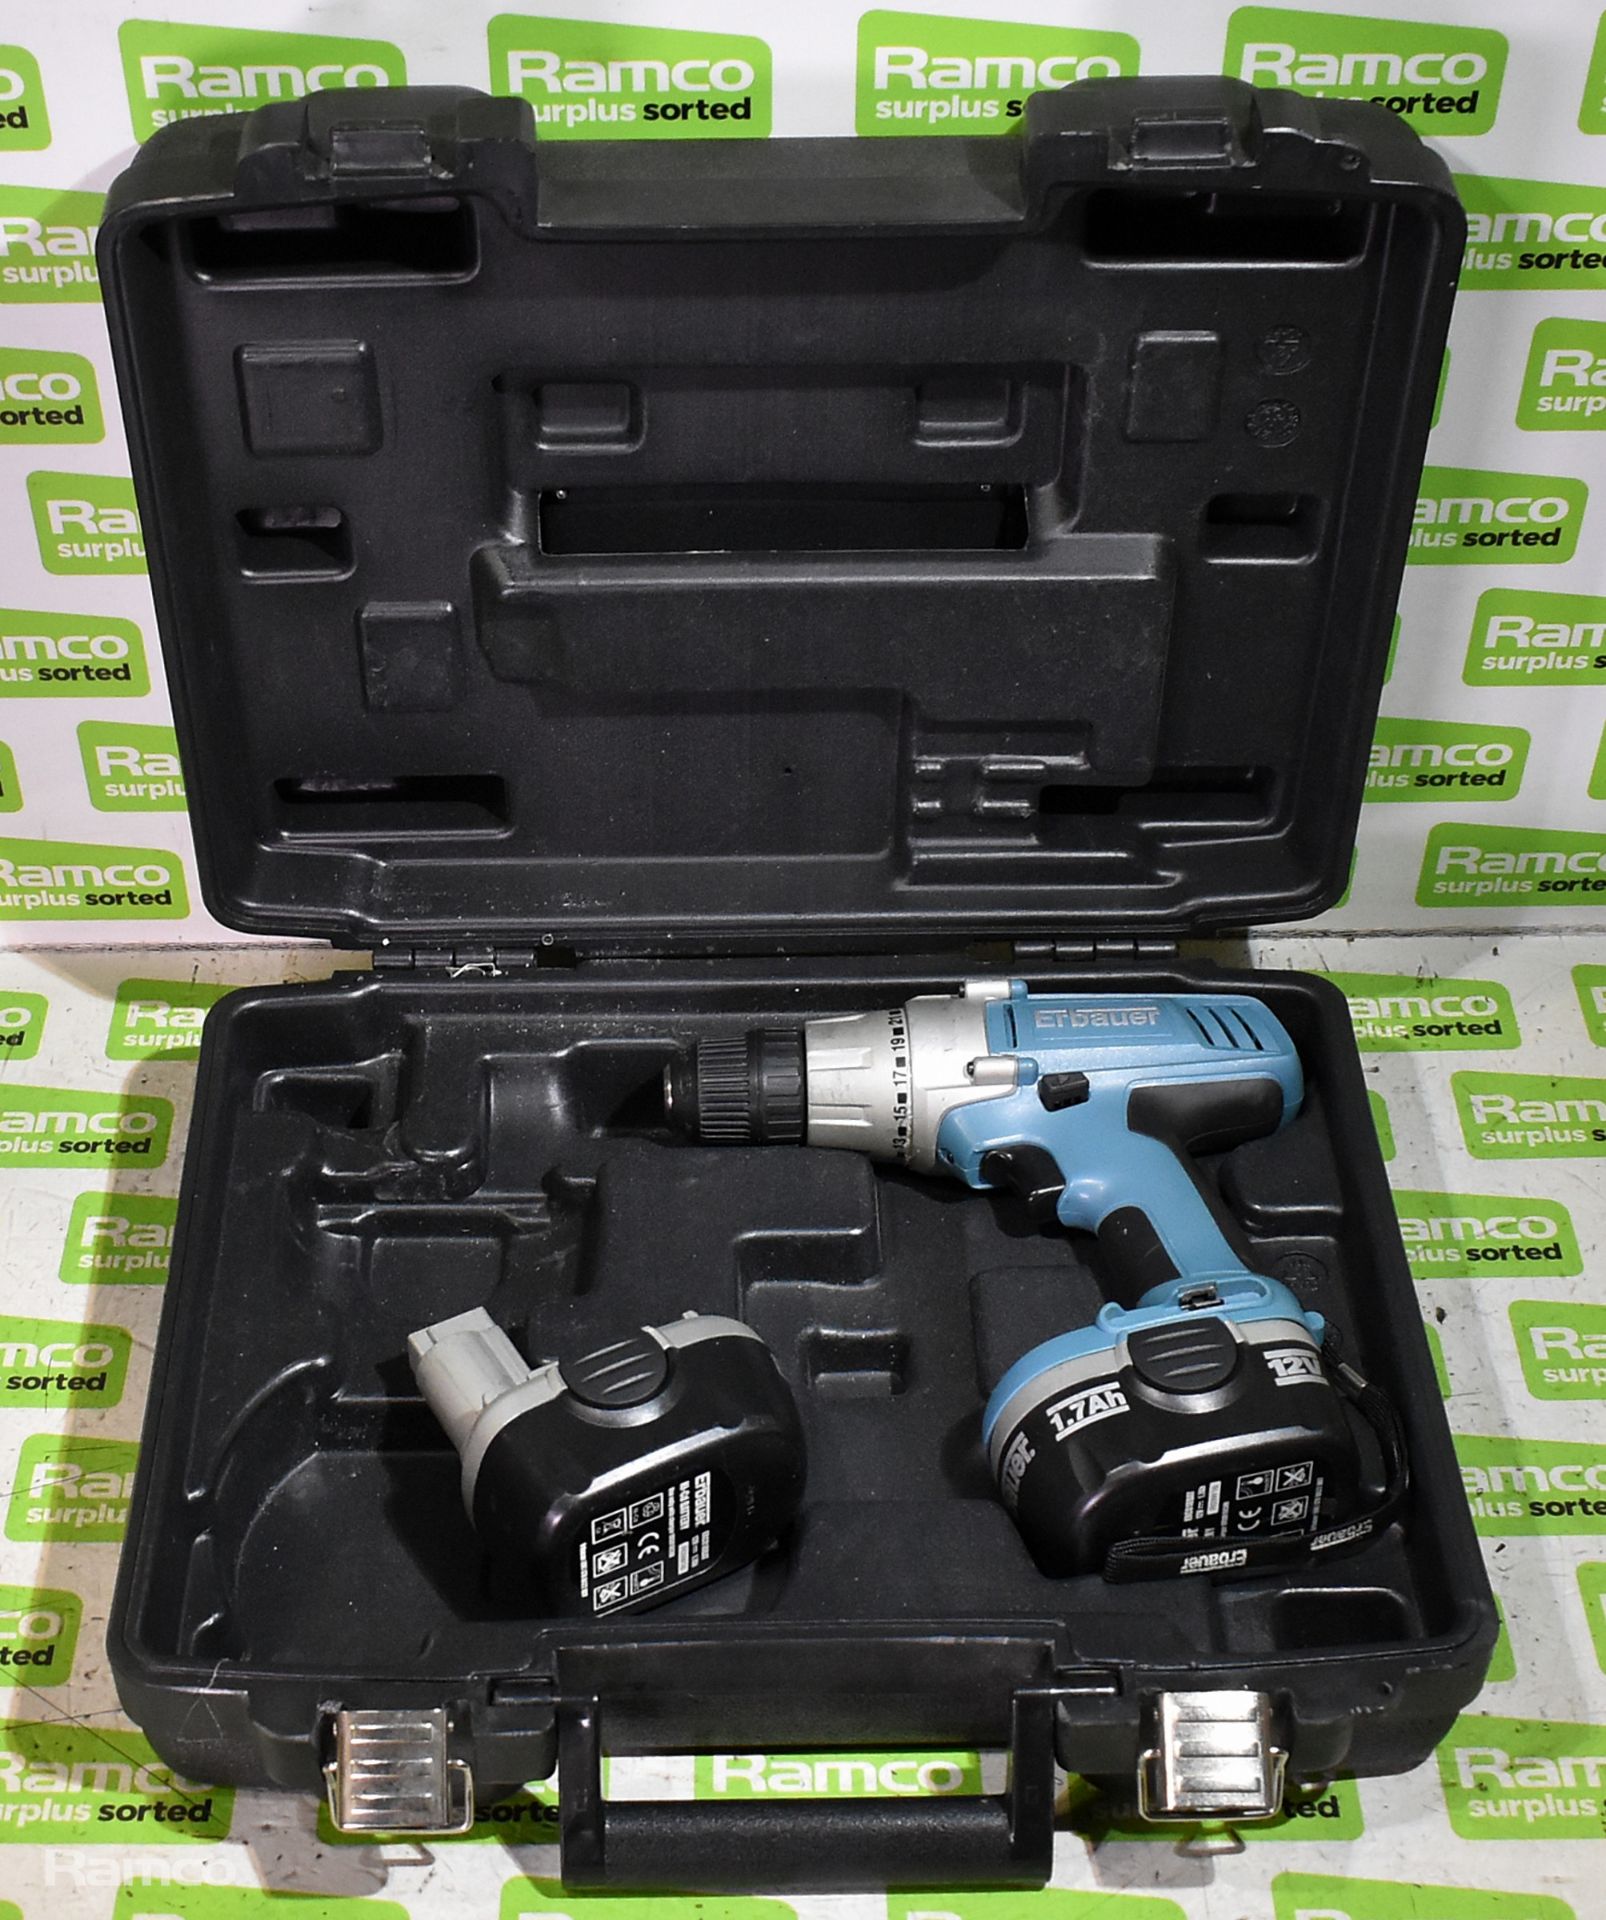 Erbauer 12V drill driver R09W16 with spare battery in carry case - NO CHARGER